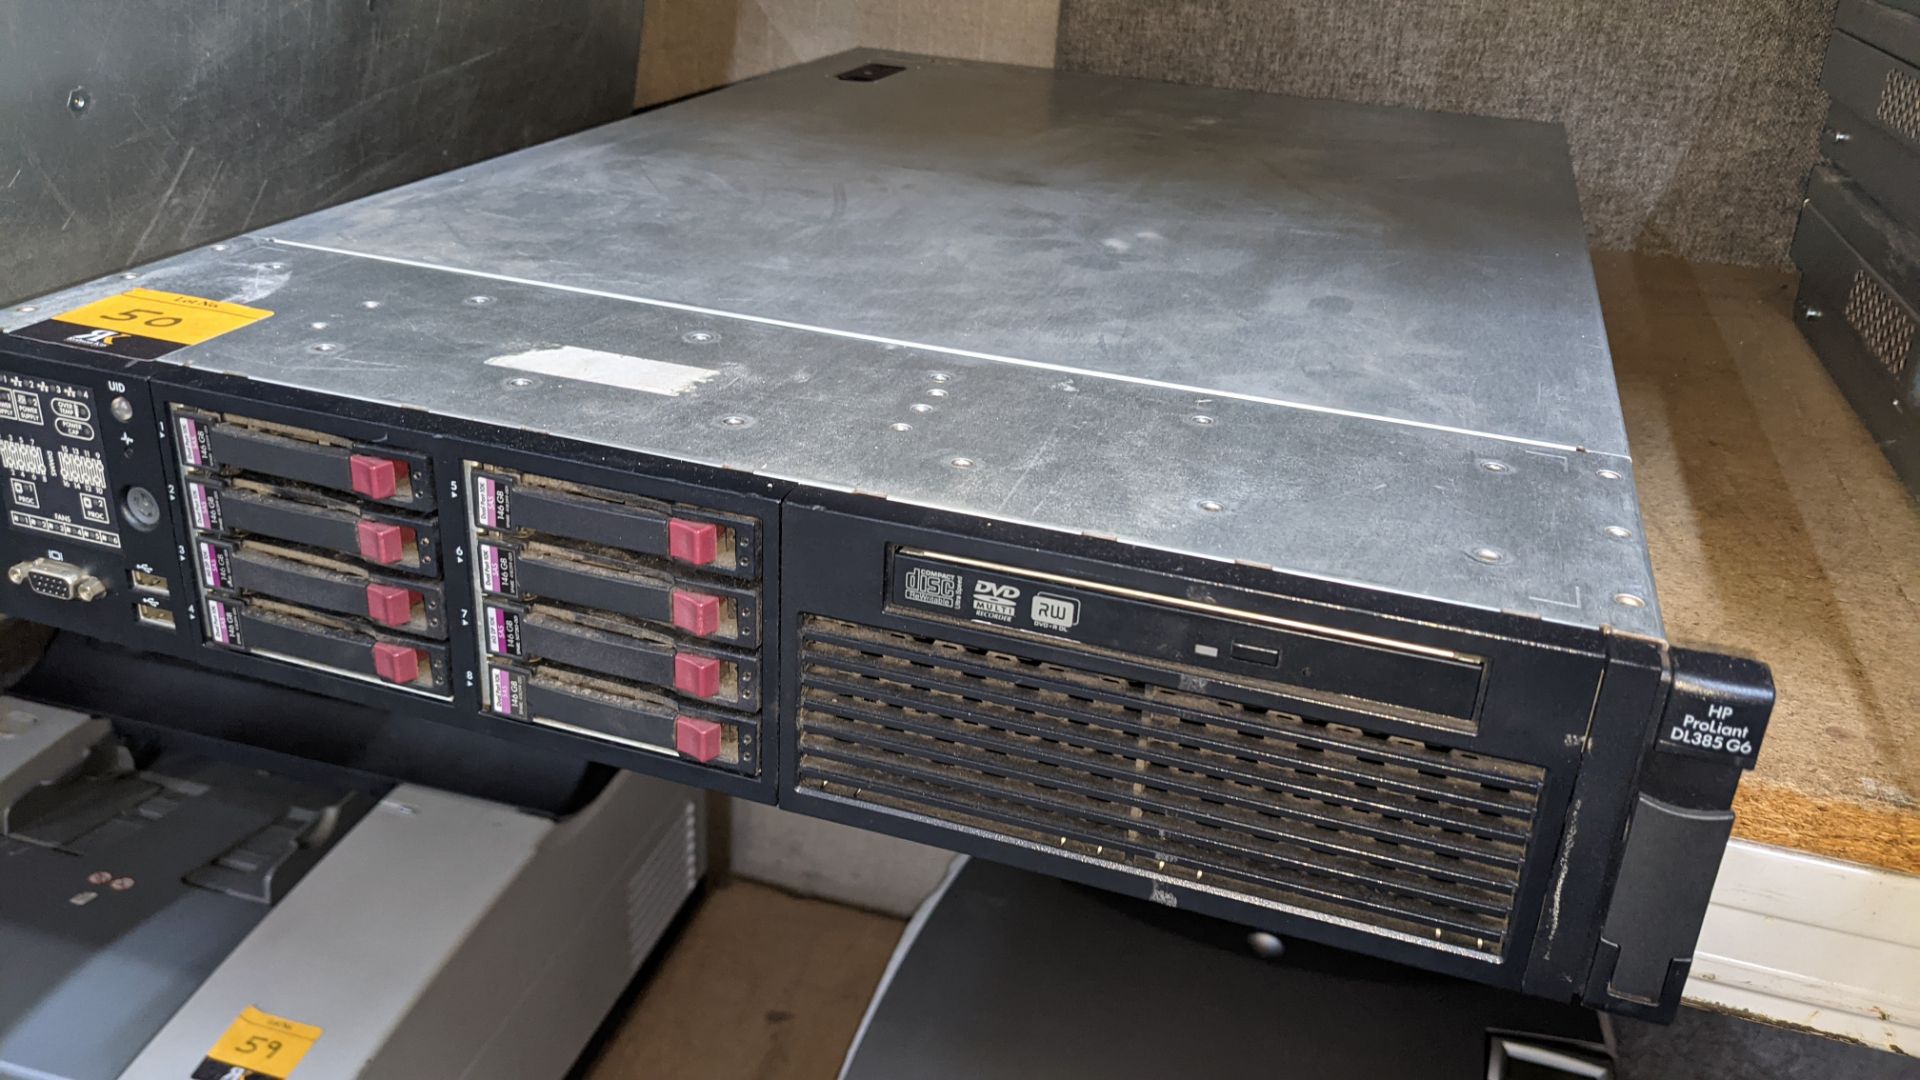 HP DL385 G6 rack mountable server with 8 off 146GB 10K hard drives, 32GB RAM, 2 off AMD 2435 6 Core - Image 6 of 11